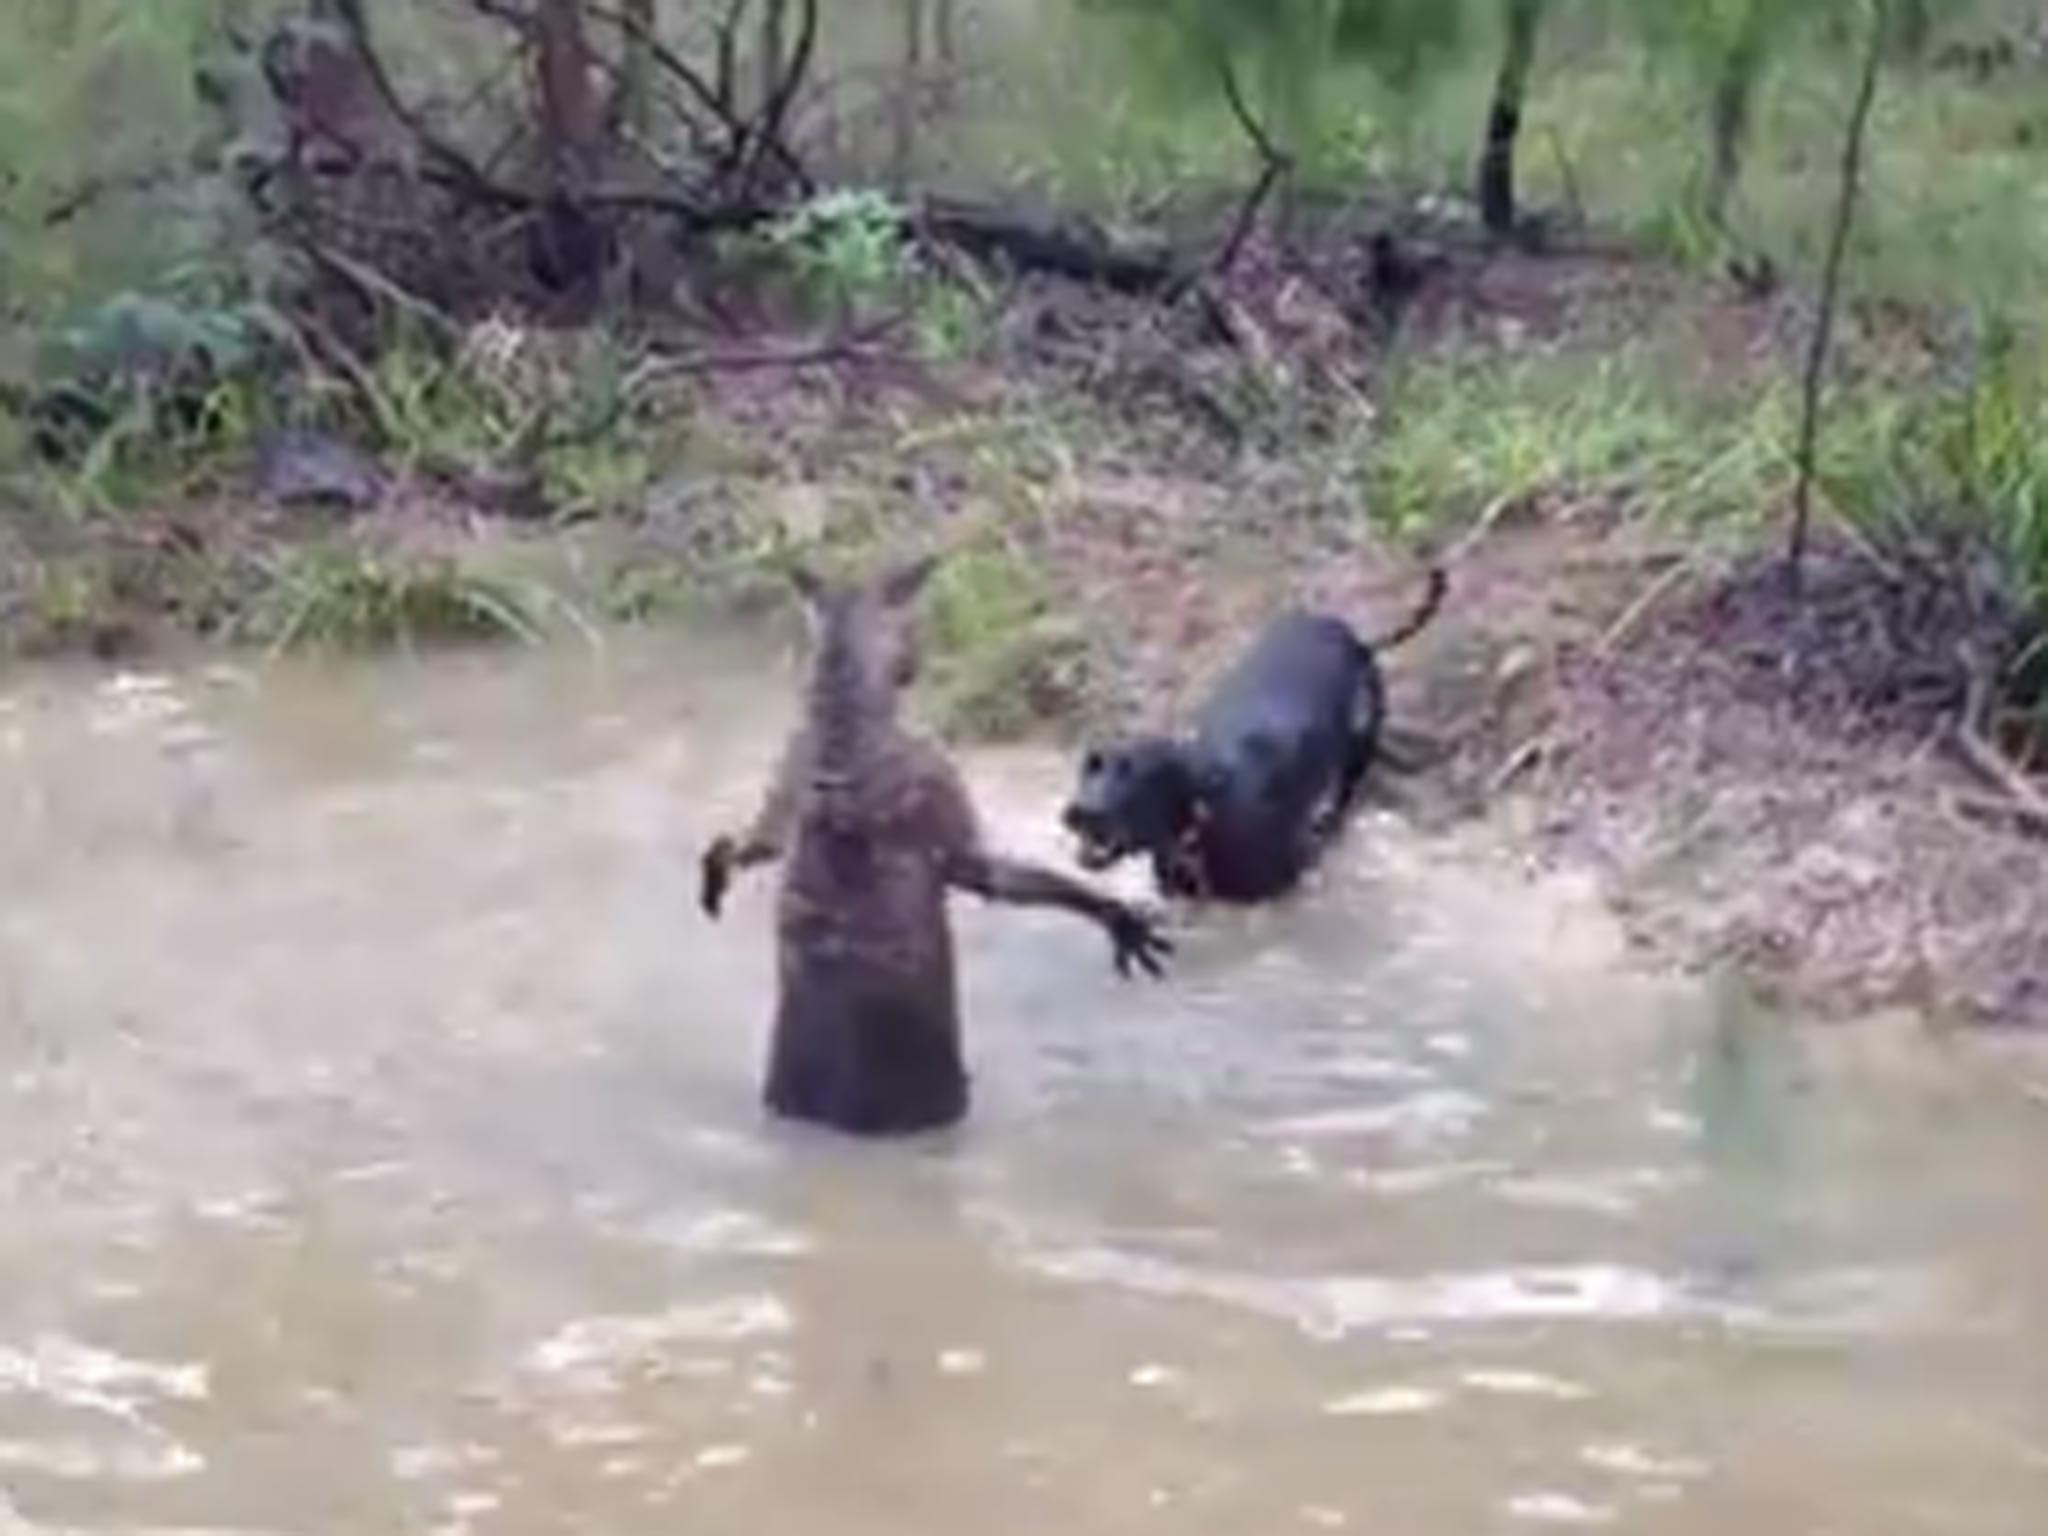 A video with the ominous title “Kangaroo Tries to Drown Dog” has sparked controversy in Australia